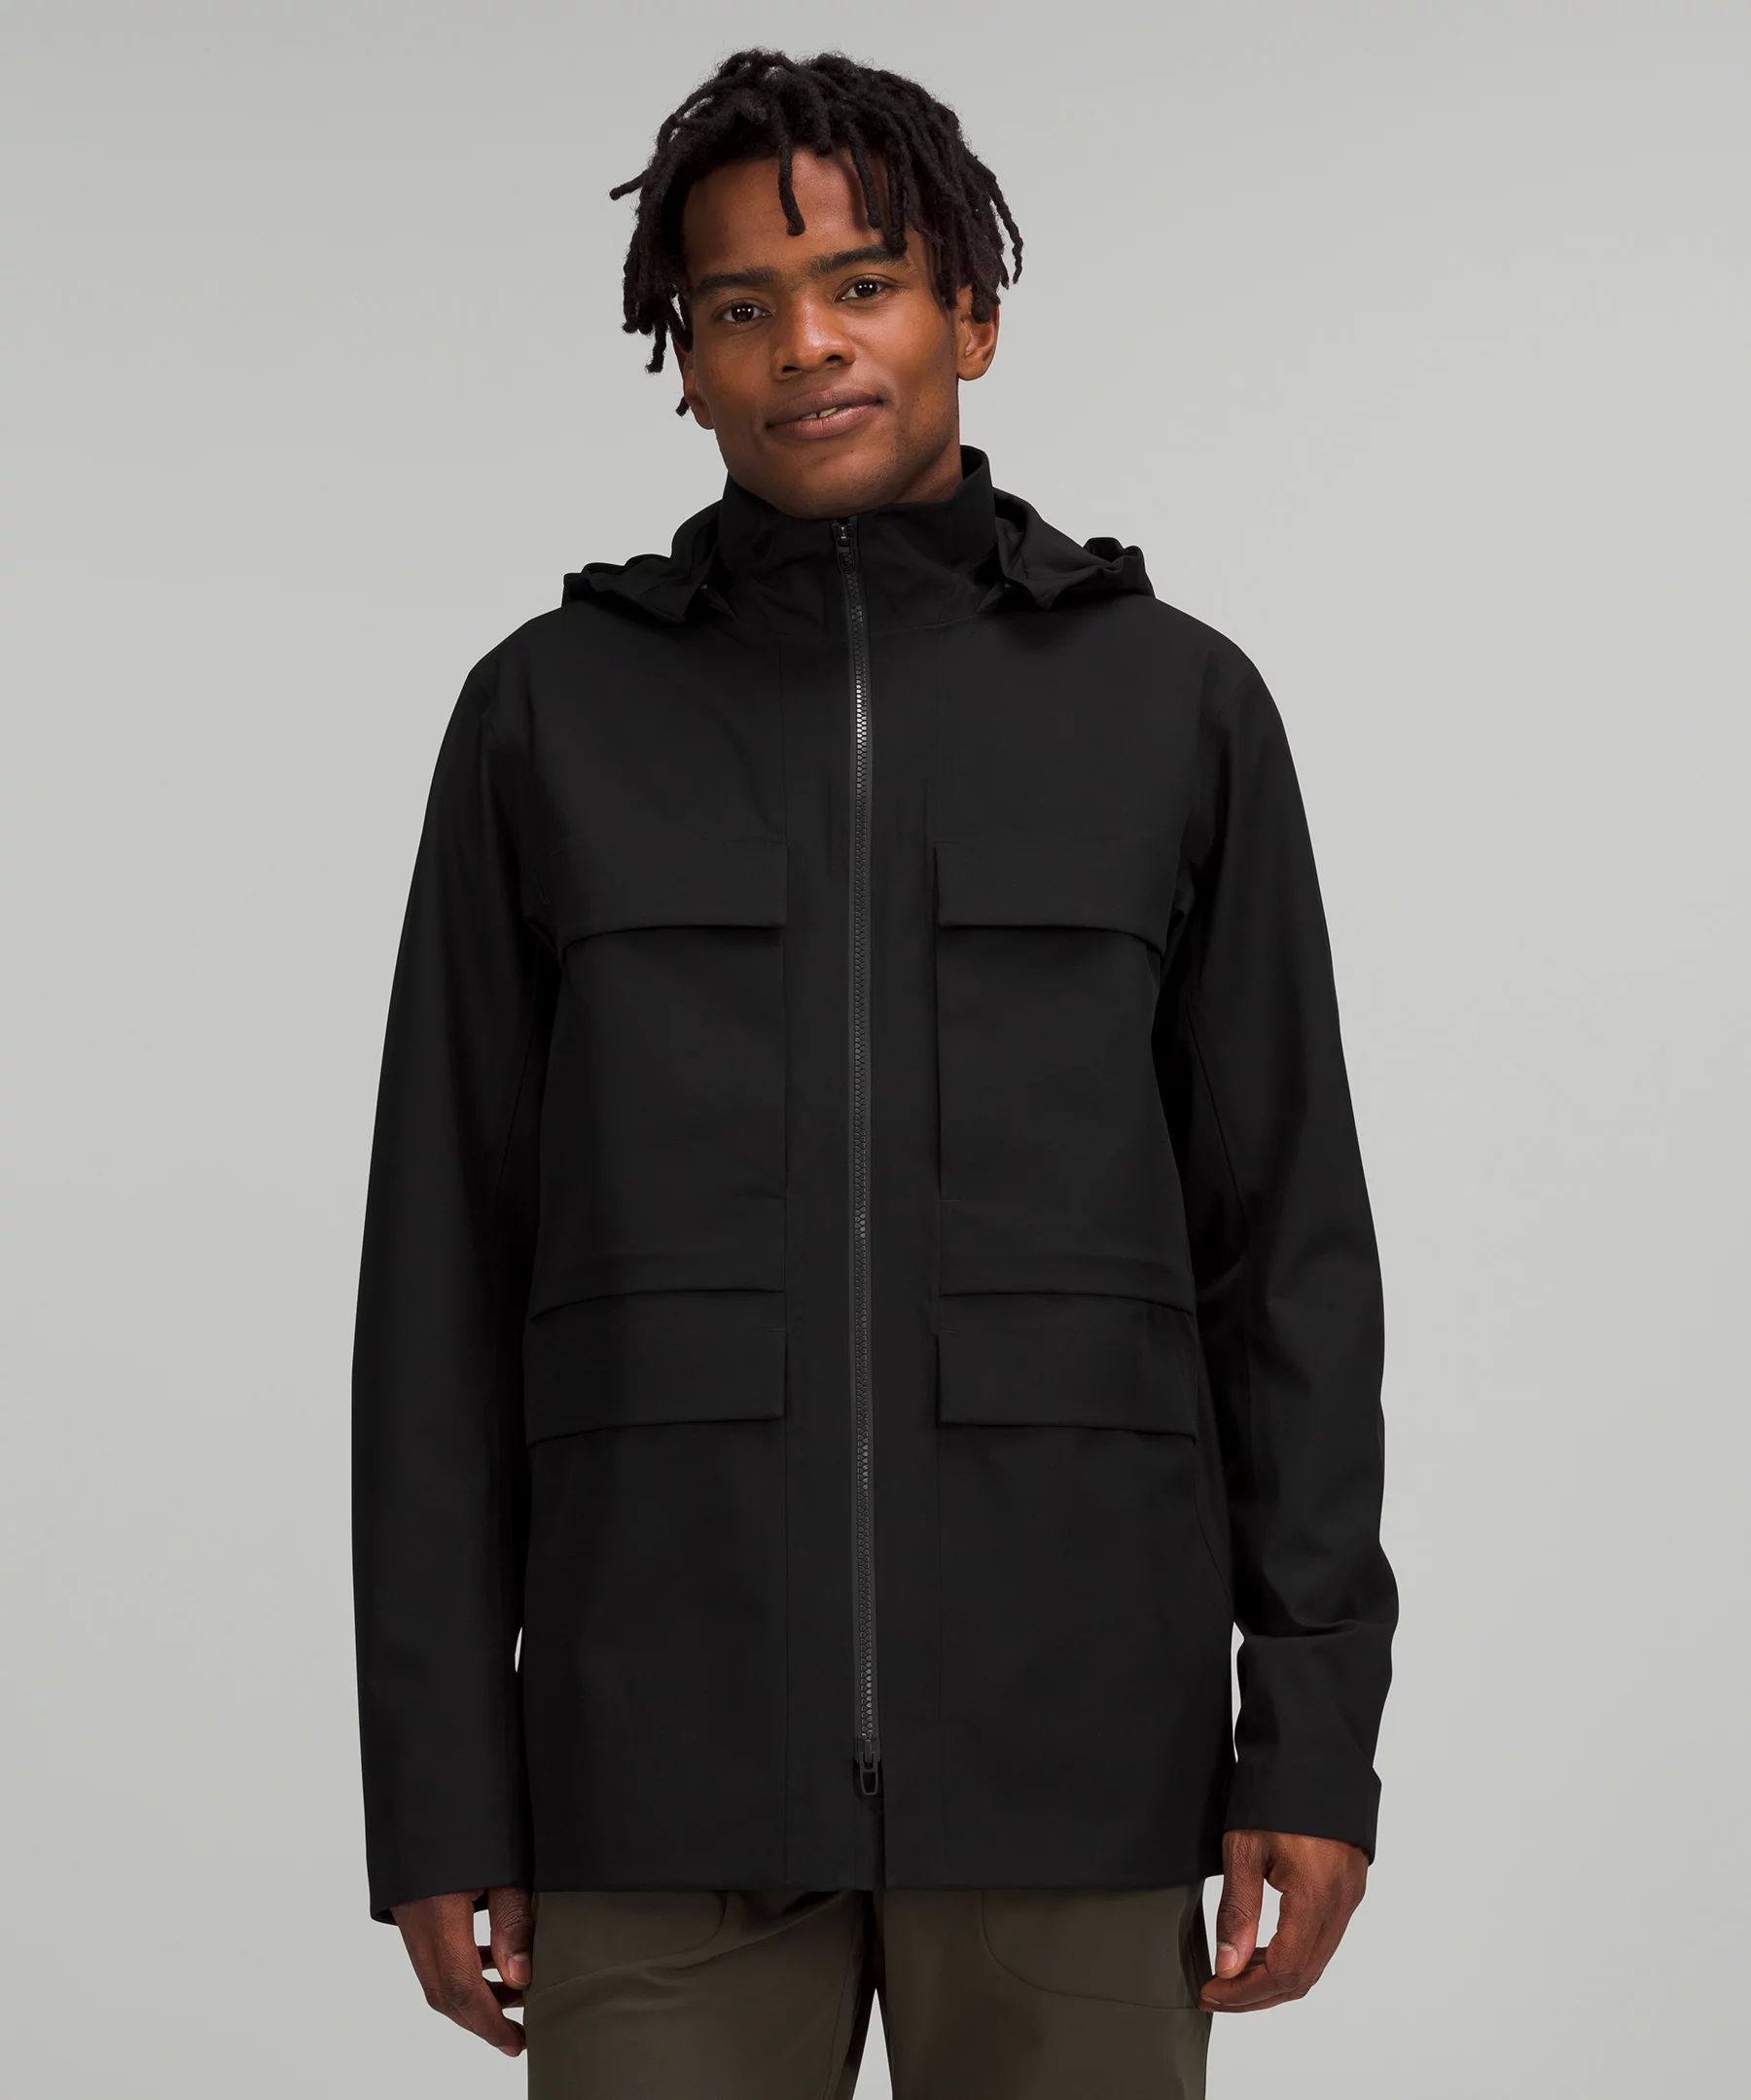 Outpour StretchSeal Field Jacket | Lululemon (US)